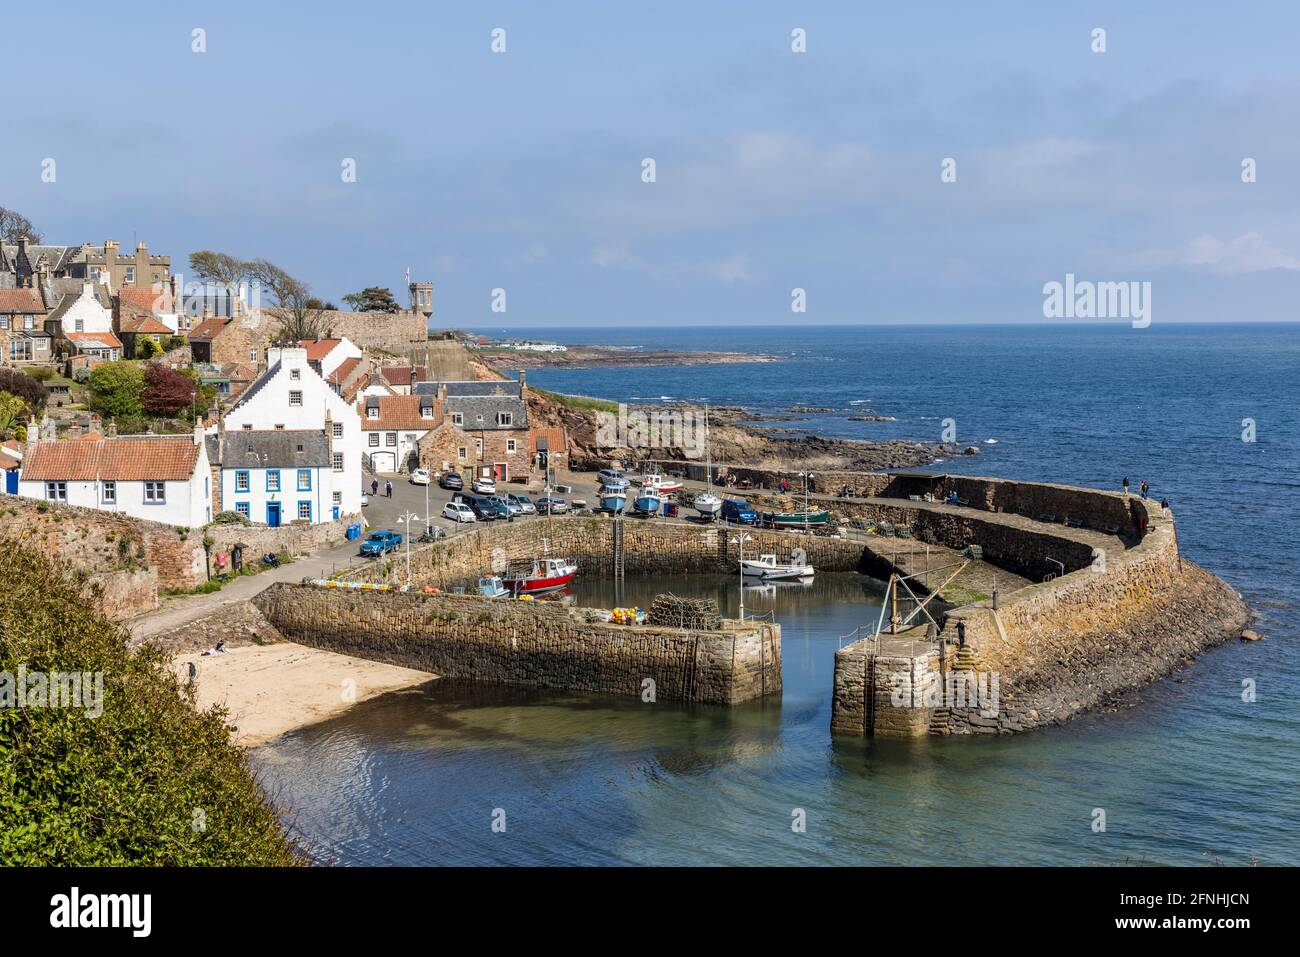 VP1 - High viewpoint to Crail Harbour. Canon EOS R5, RF24-105mm F4 L IS USM at 58mm, ISO 100, 1/200s at f/11. May Stock Photo